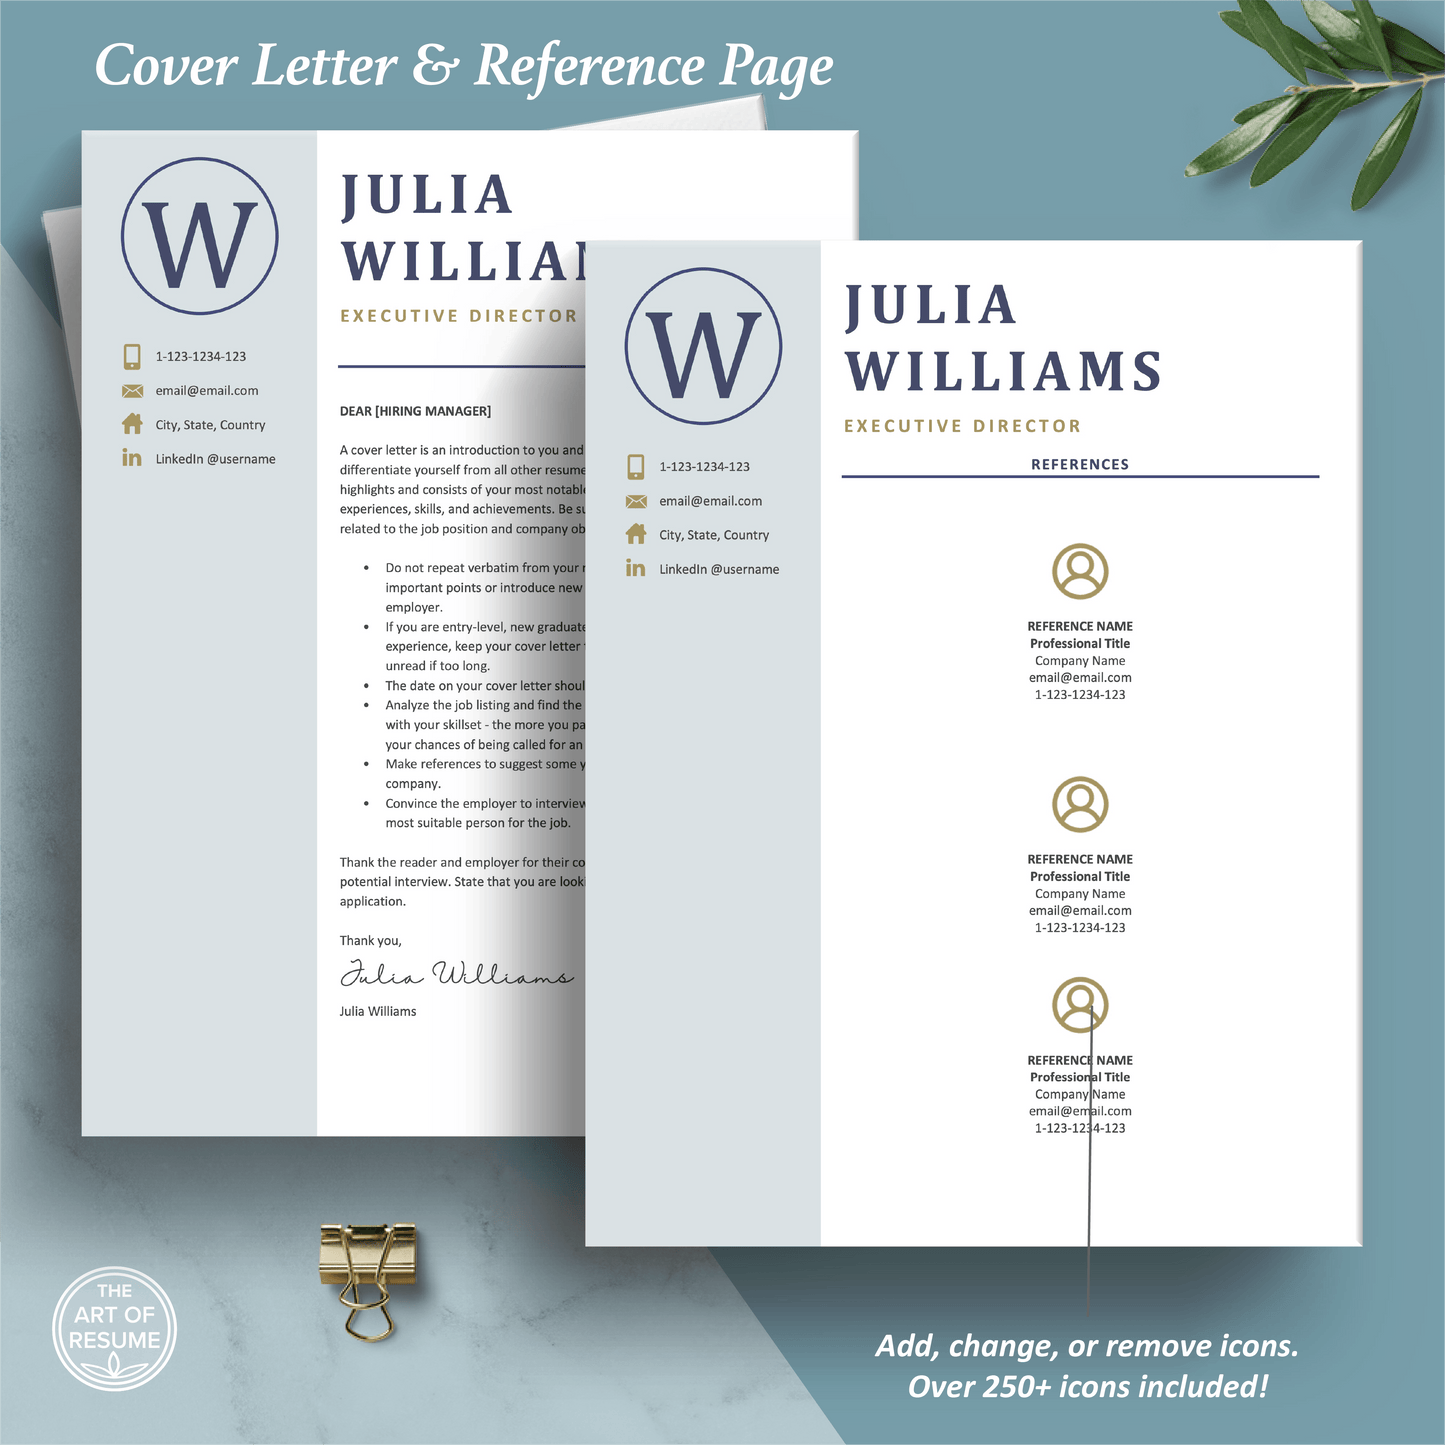 The Art of Resume Templates | Professional Blue Cover Letter and Reference Page Templates Download